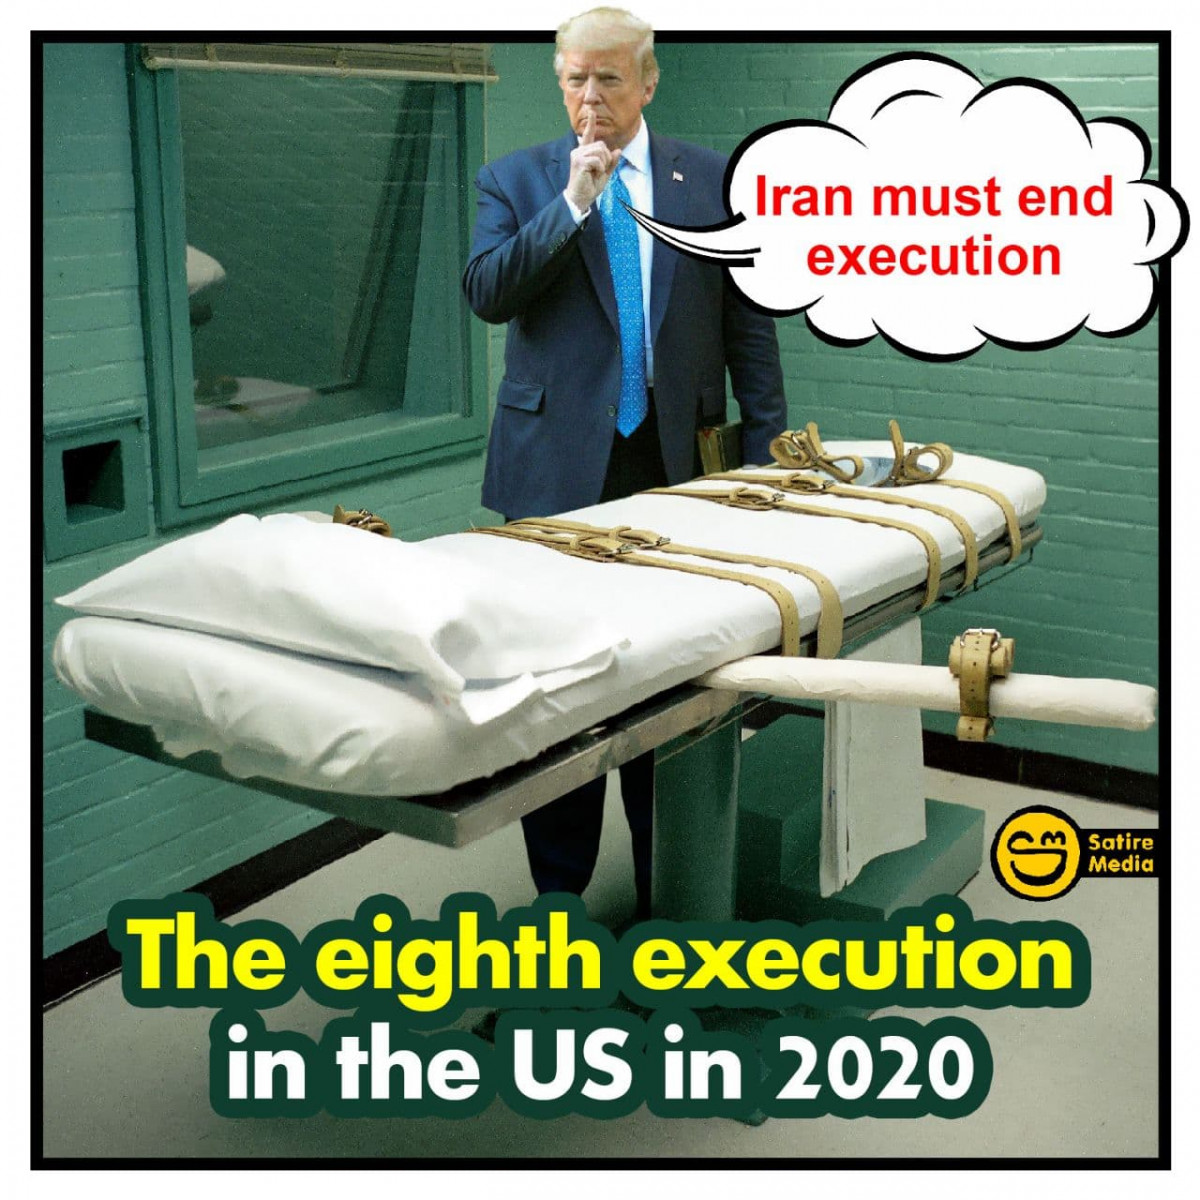 The eighth execution in the US in 2020